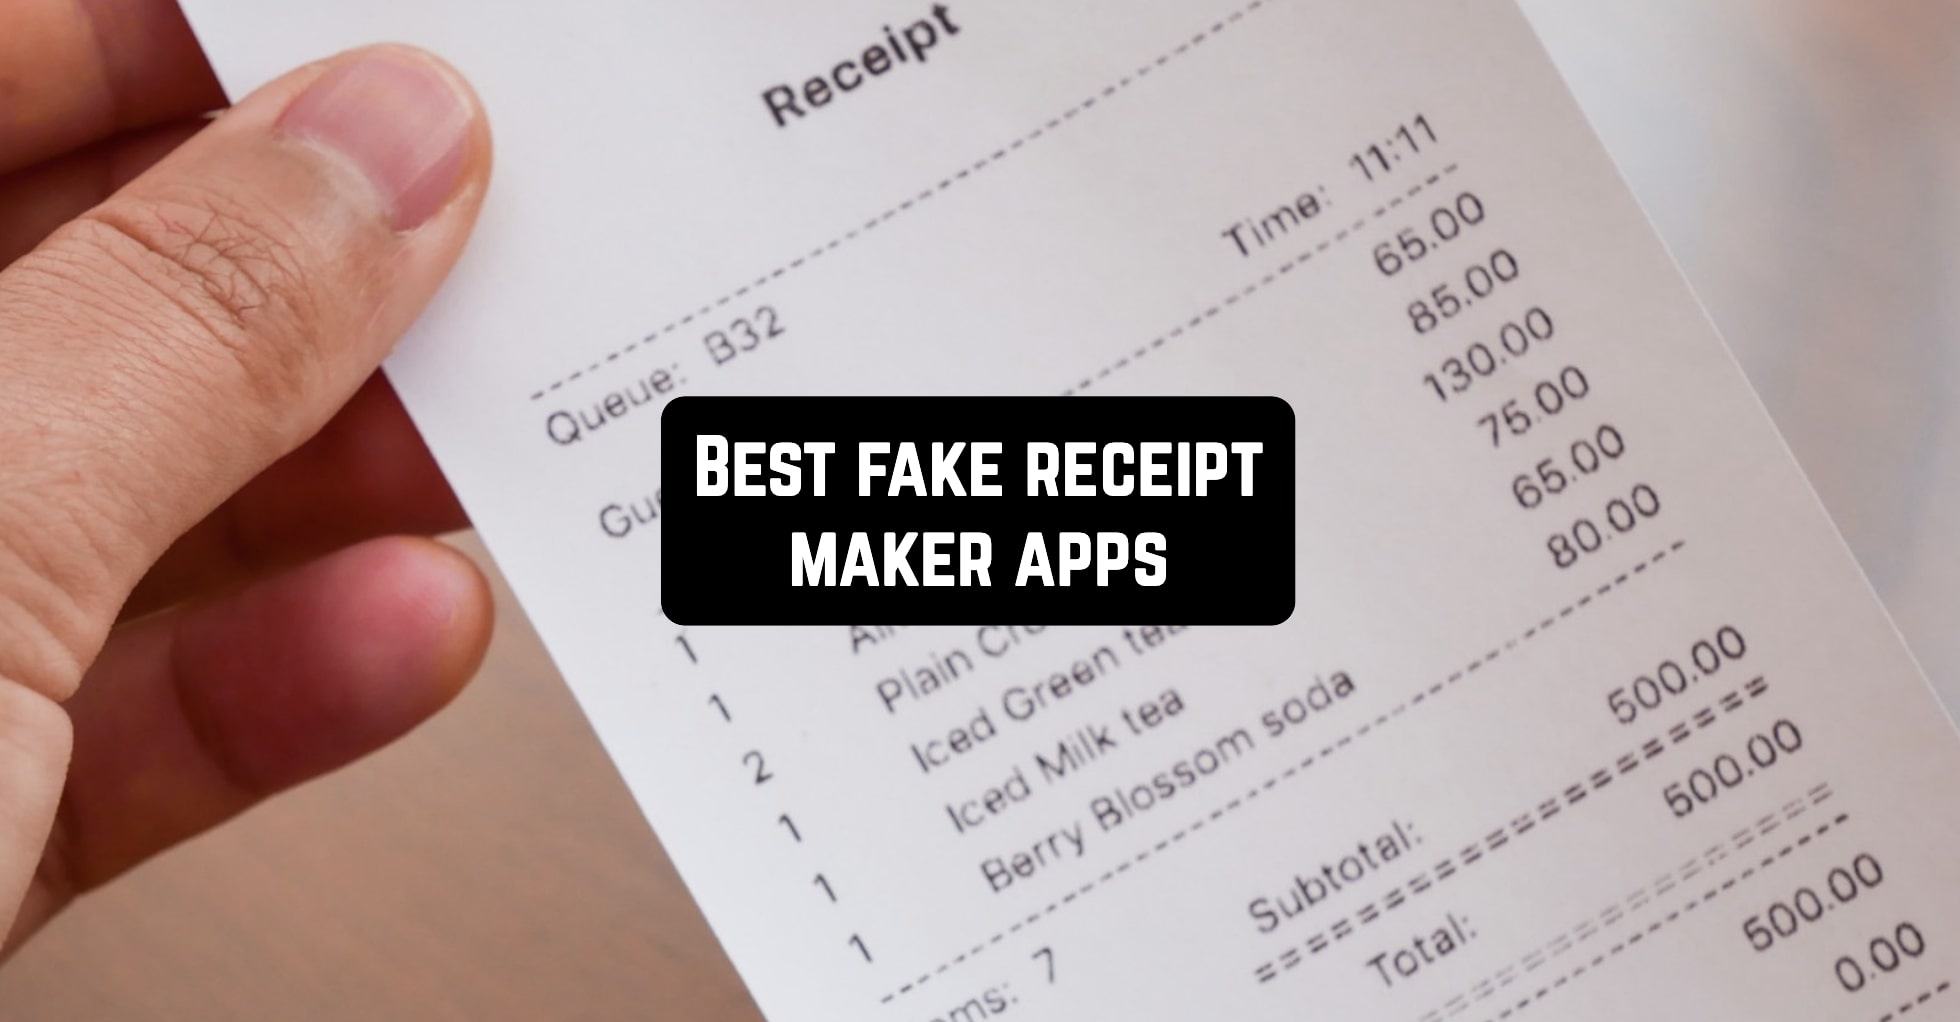 10 Best fake receipt maker apps for Android & iOS - App pearl - Best mobile apps for Android & iOS devices